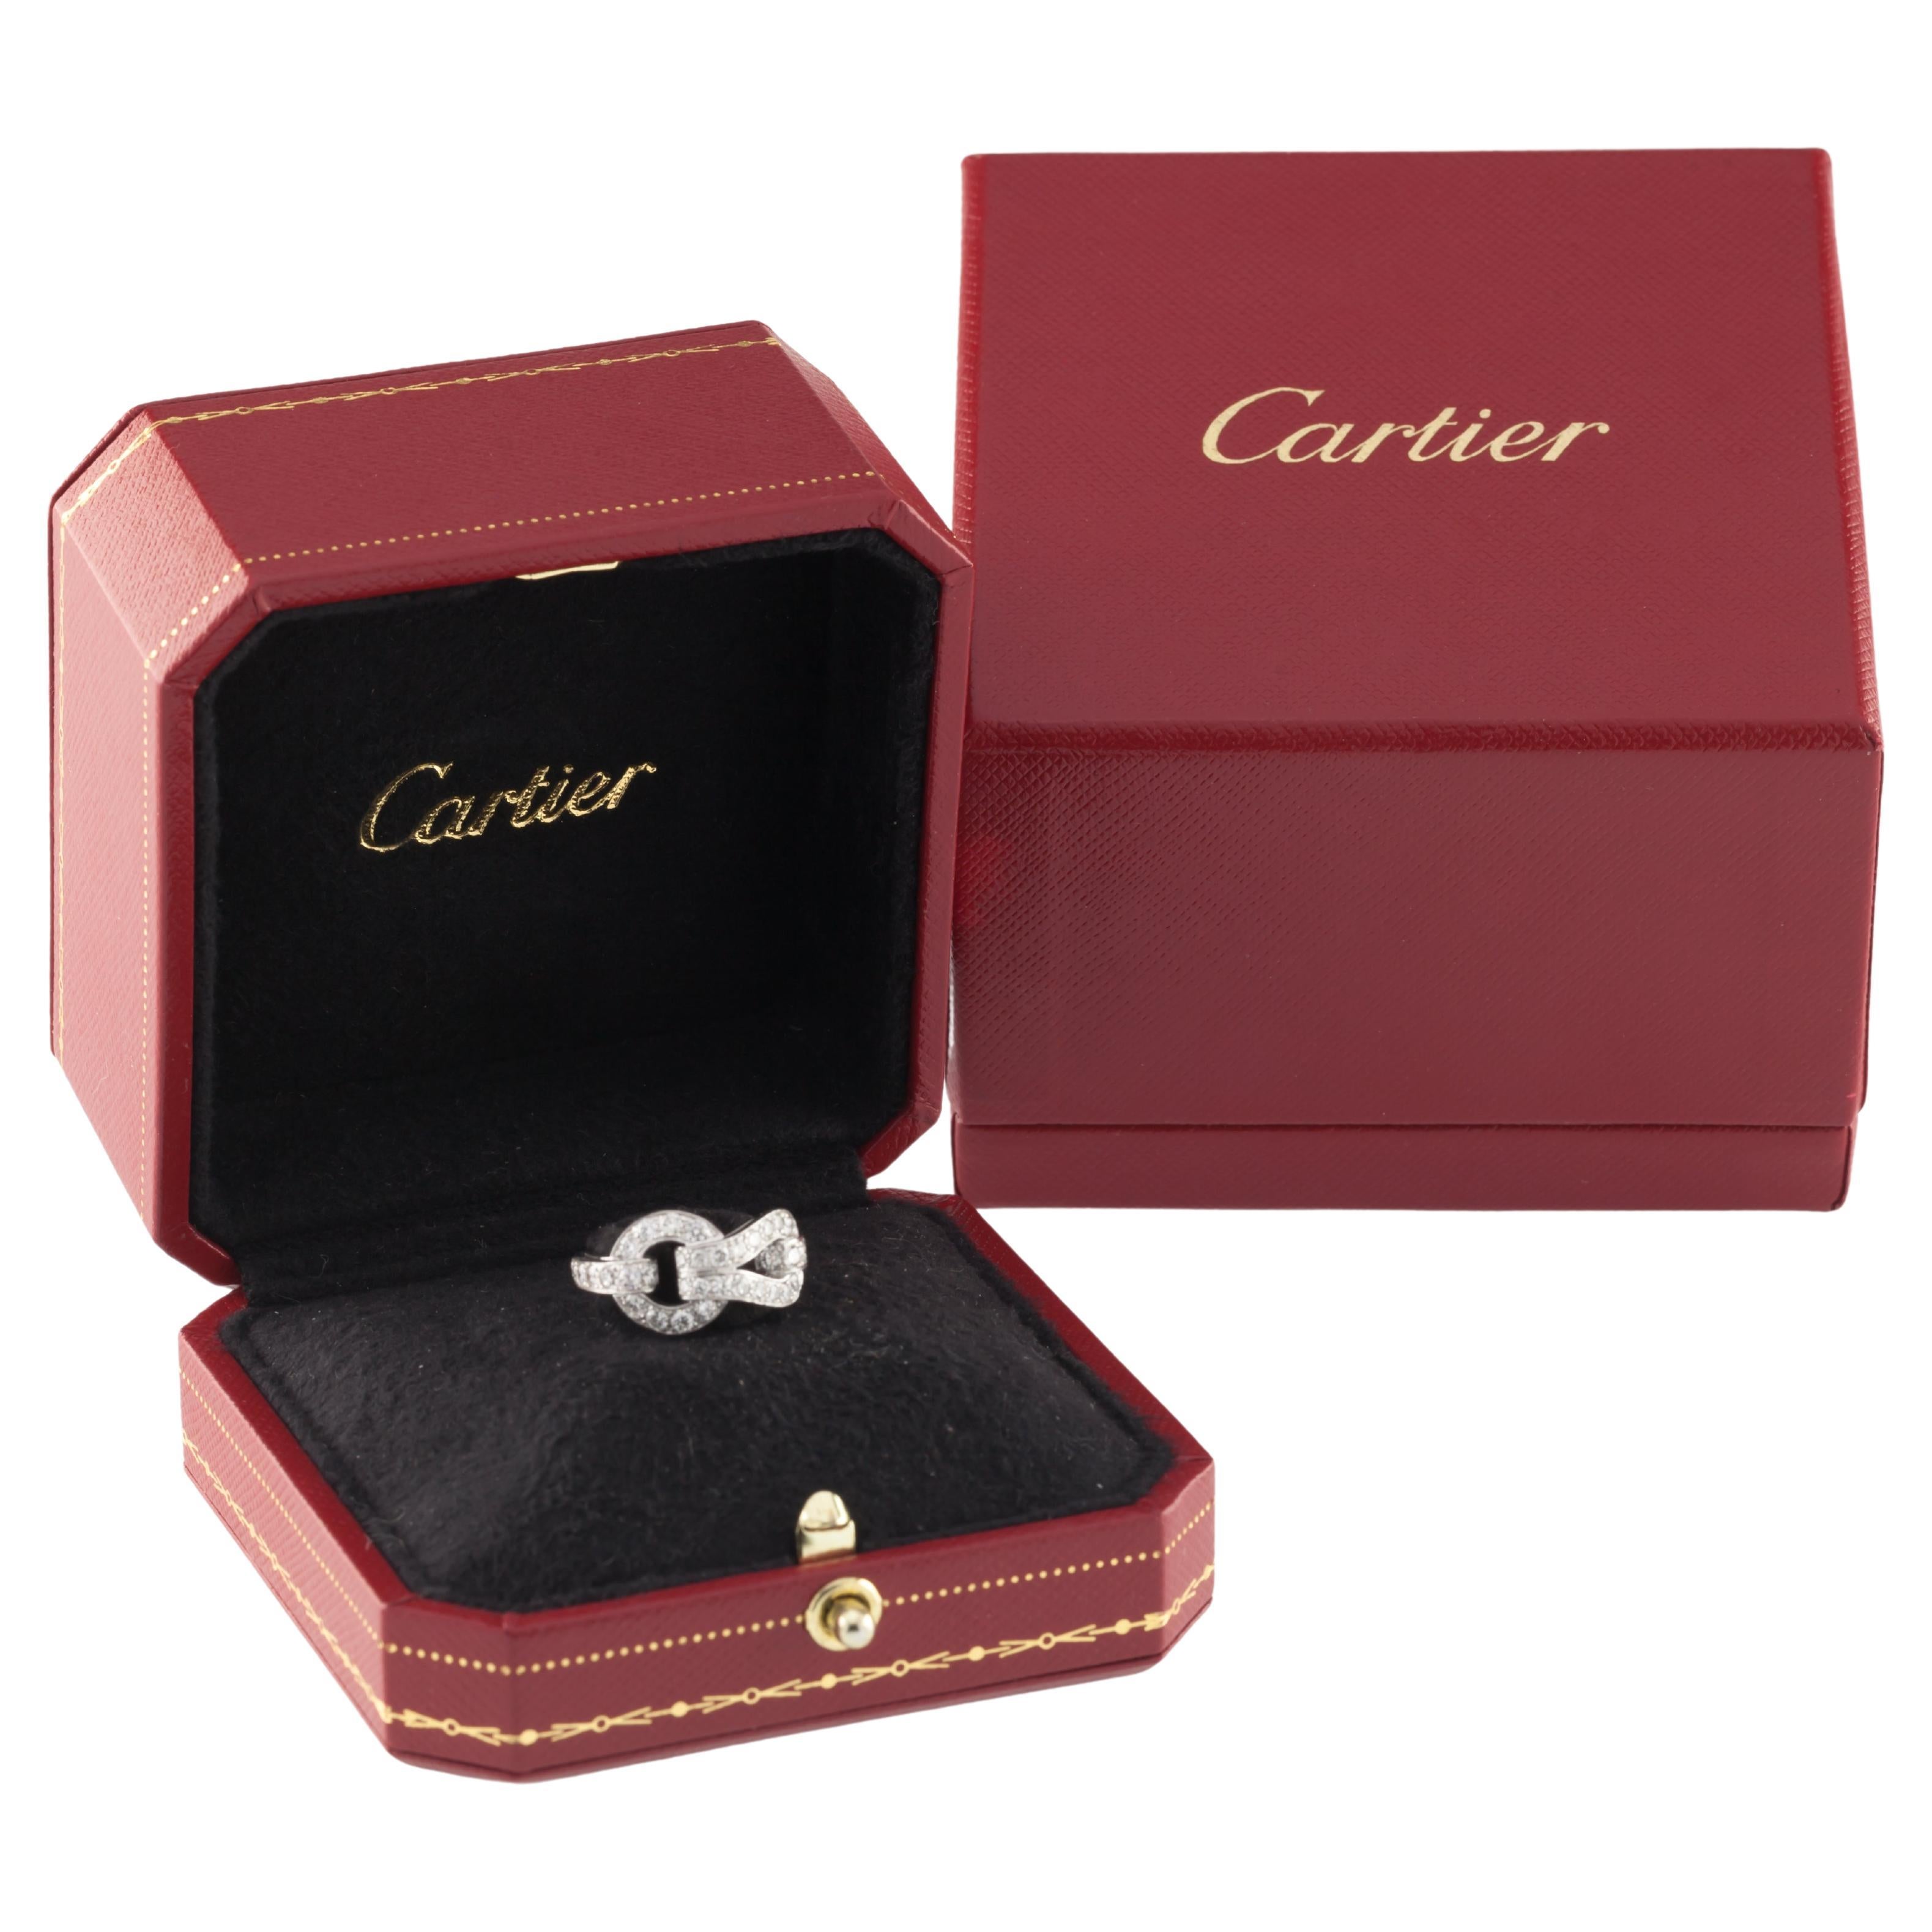 Cartier 18k White Gold Agrafe Band Ring 0.94 Ct w/ Original Box For Sale